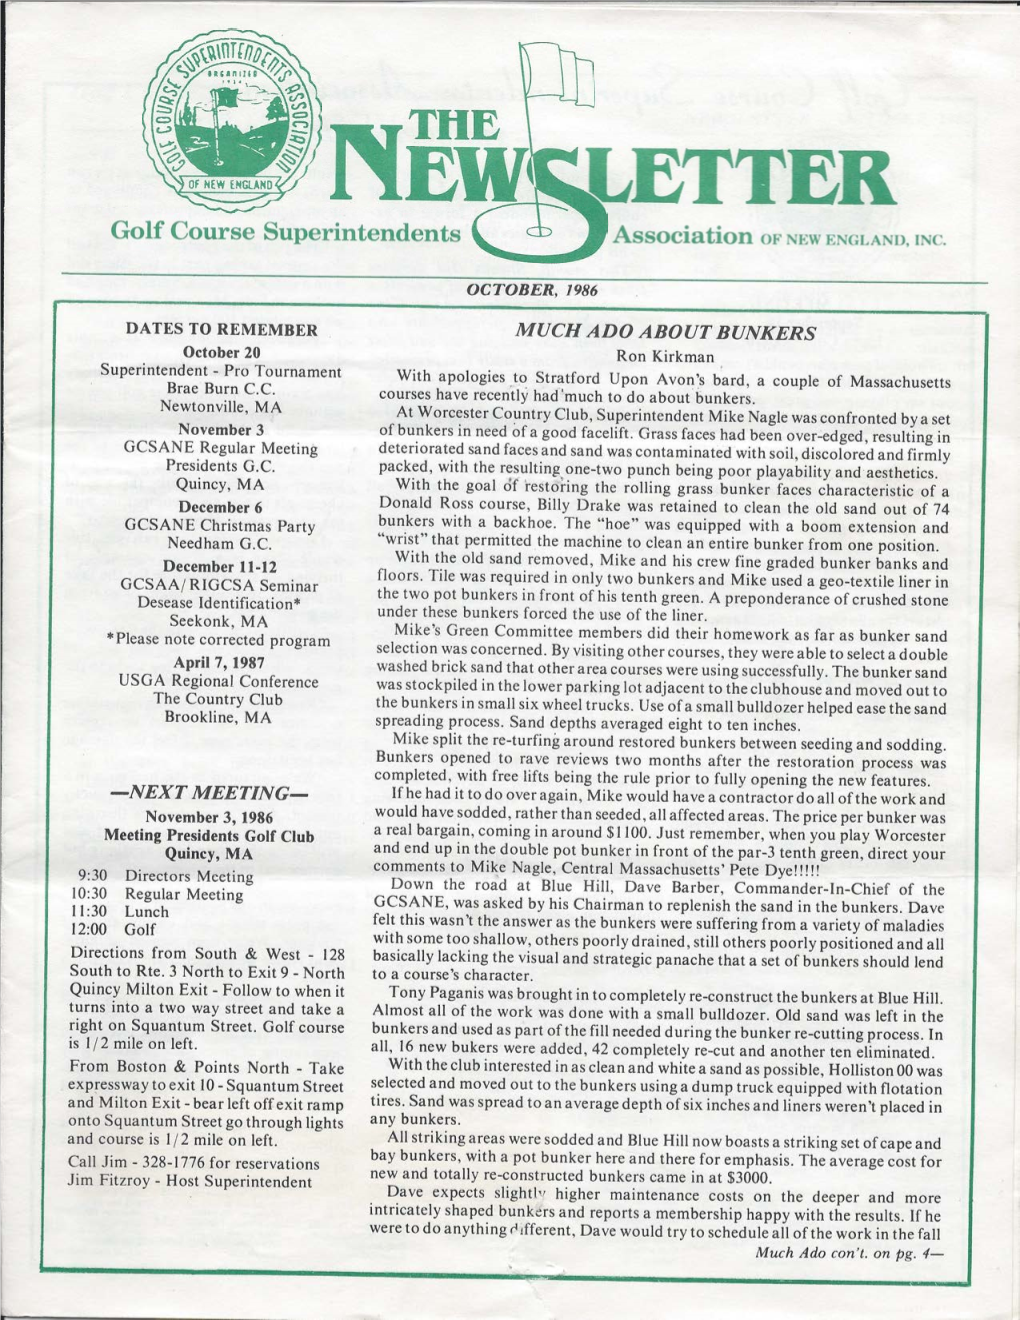 LETTER Golf Course Superintendents Association of NEW ENGLAND, INC